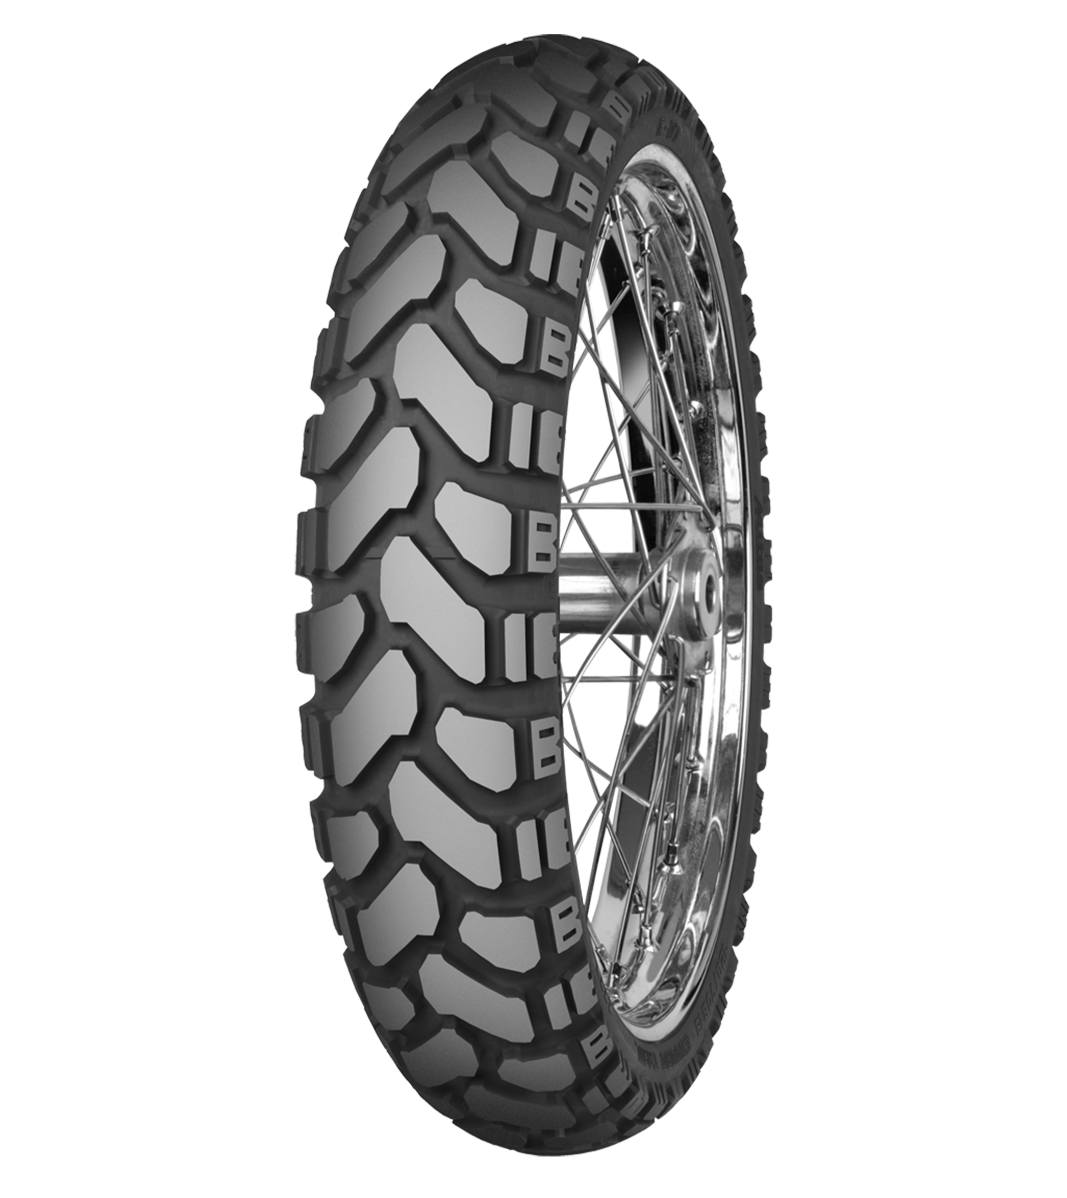 Mitas E-07+ ENDURO TRAIL 120/80B18 Trail ON Trail 62T No Stripe Tubeless Rear Tire, 224400, 120/80B18, Adventure Touring, E Series, E-07+ Enduro Trail, Rear, Trail, Trail ON, Tires - Imported and distributed in North &amp; South America by Lindeco Genuine Powersports - Premier Powersports Equipment and Accessories for Motorcycle Enthusiasts, Professional Riders and Dealers.